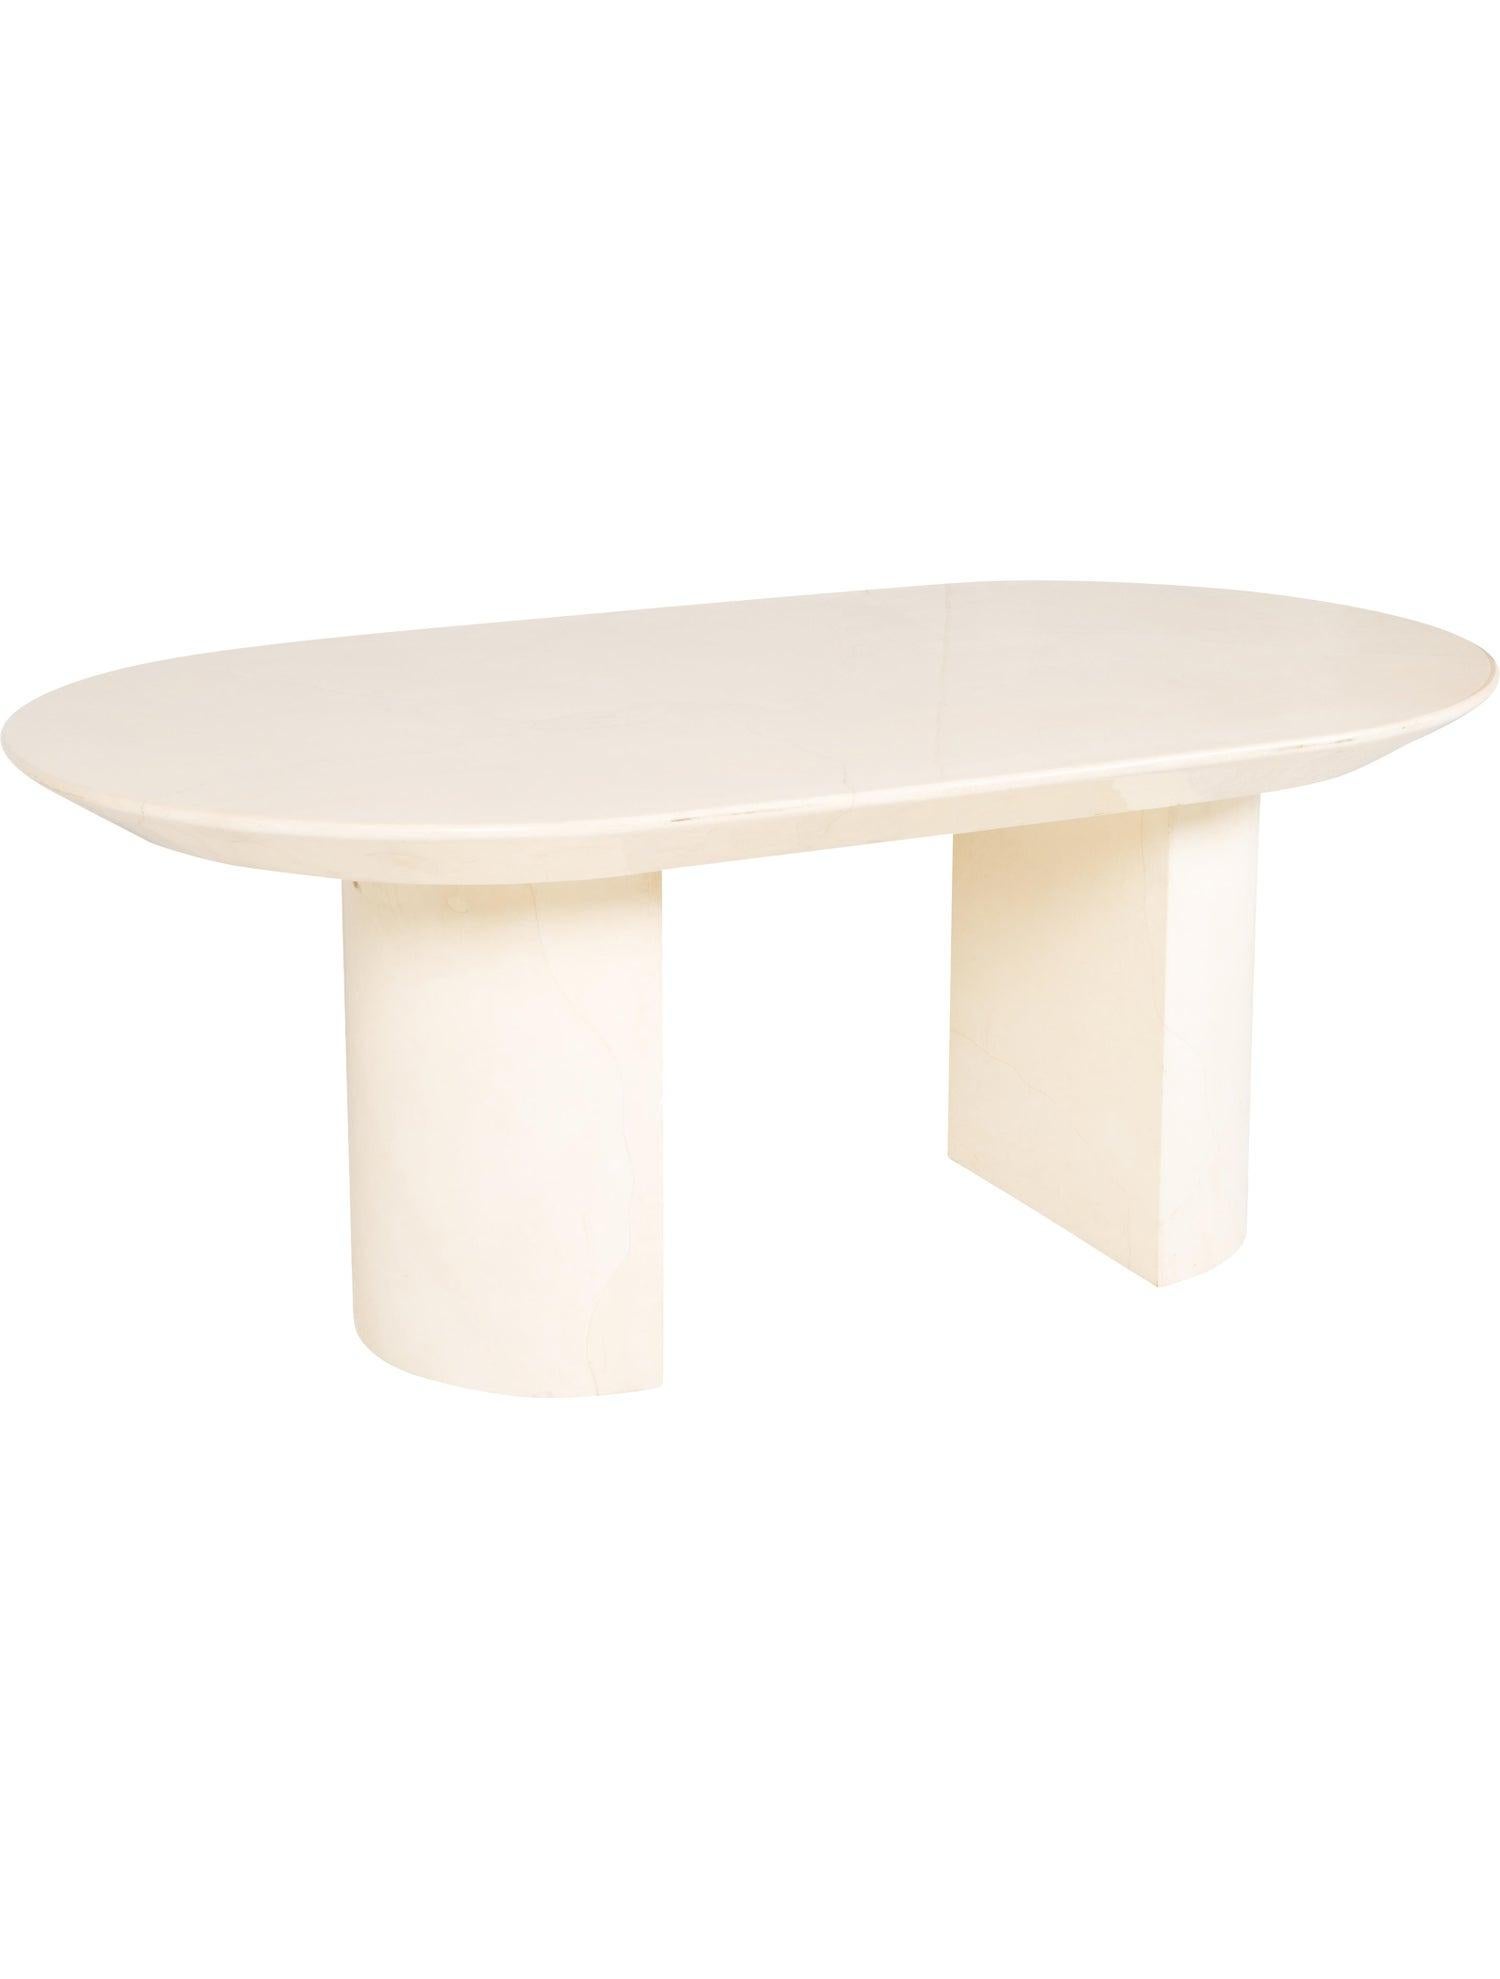 Lacquered creme-color goatskin oval dining table by Karl Springer, circa 1970s. The oval top is beveled with rounded corners, sitting atop two semi circircular slab bases, marble motif throughout. Seats 6 comfortably. Original Karl Springer sticker.